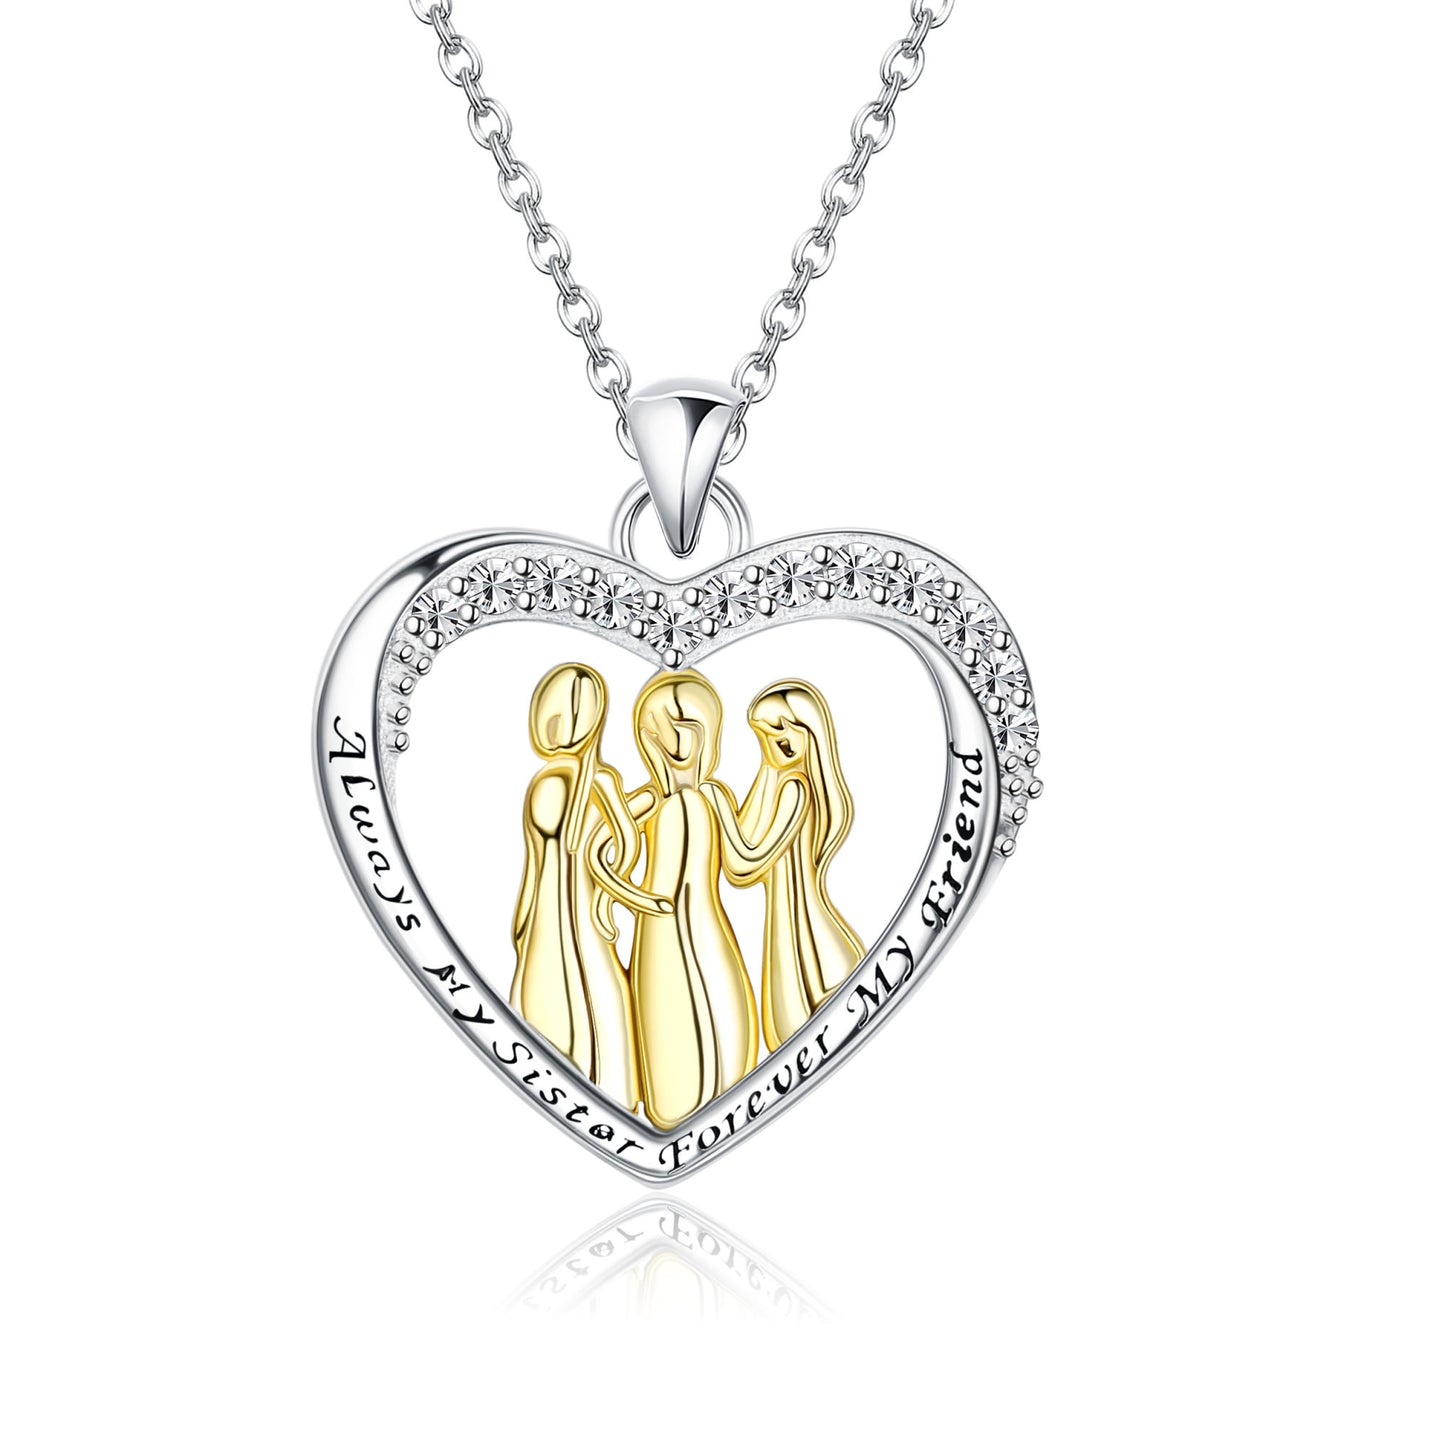 Sisters Gifts Sterling Silver Heart Necklace for Women Always My Sister Forever My Friend Pendant Necklace Female Friendship Jewelry Mother's Day Gift